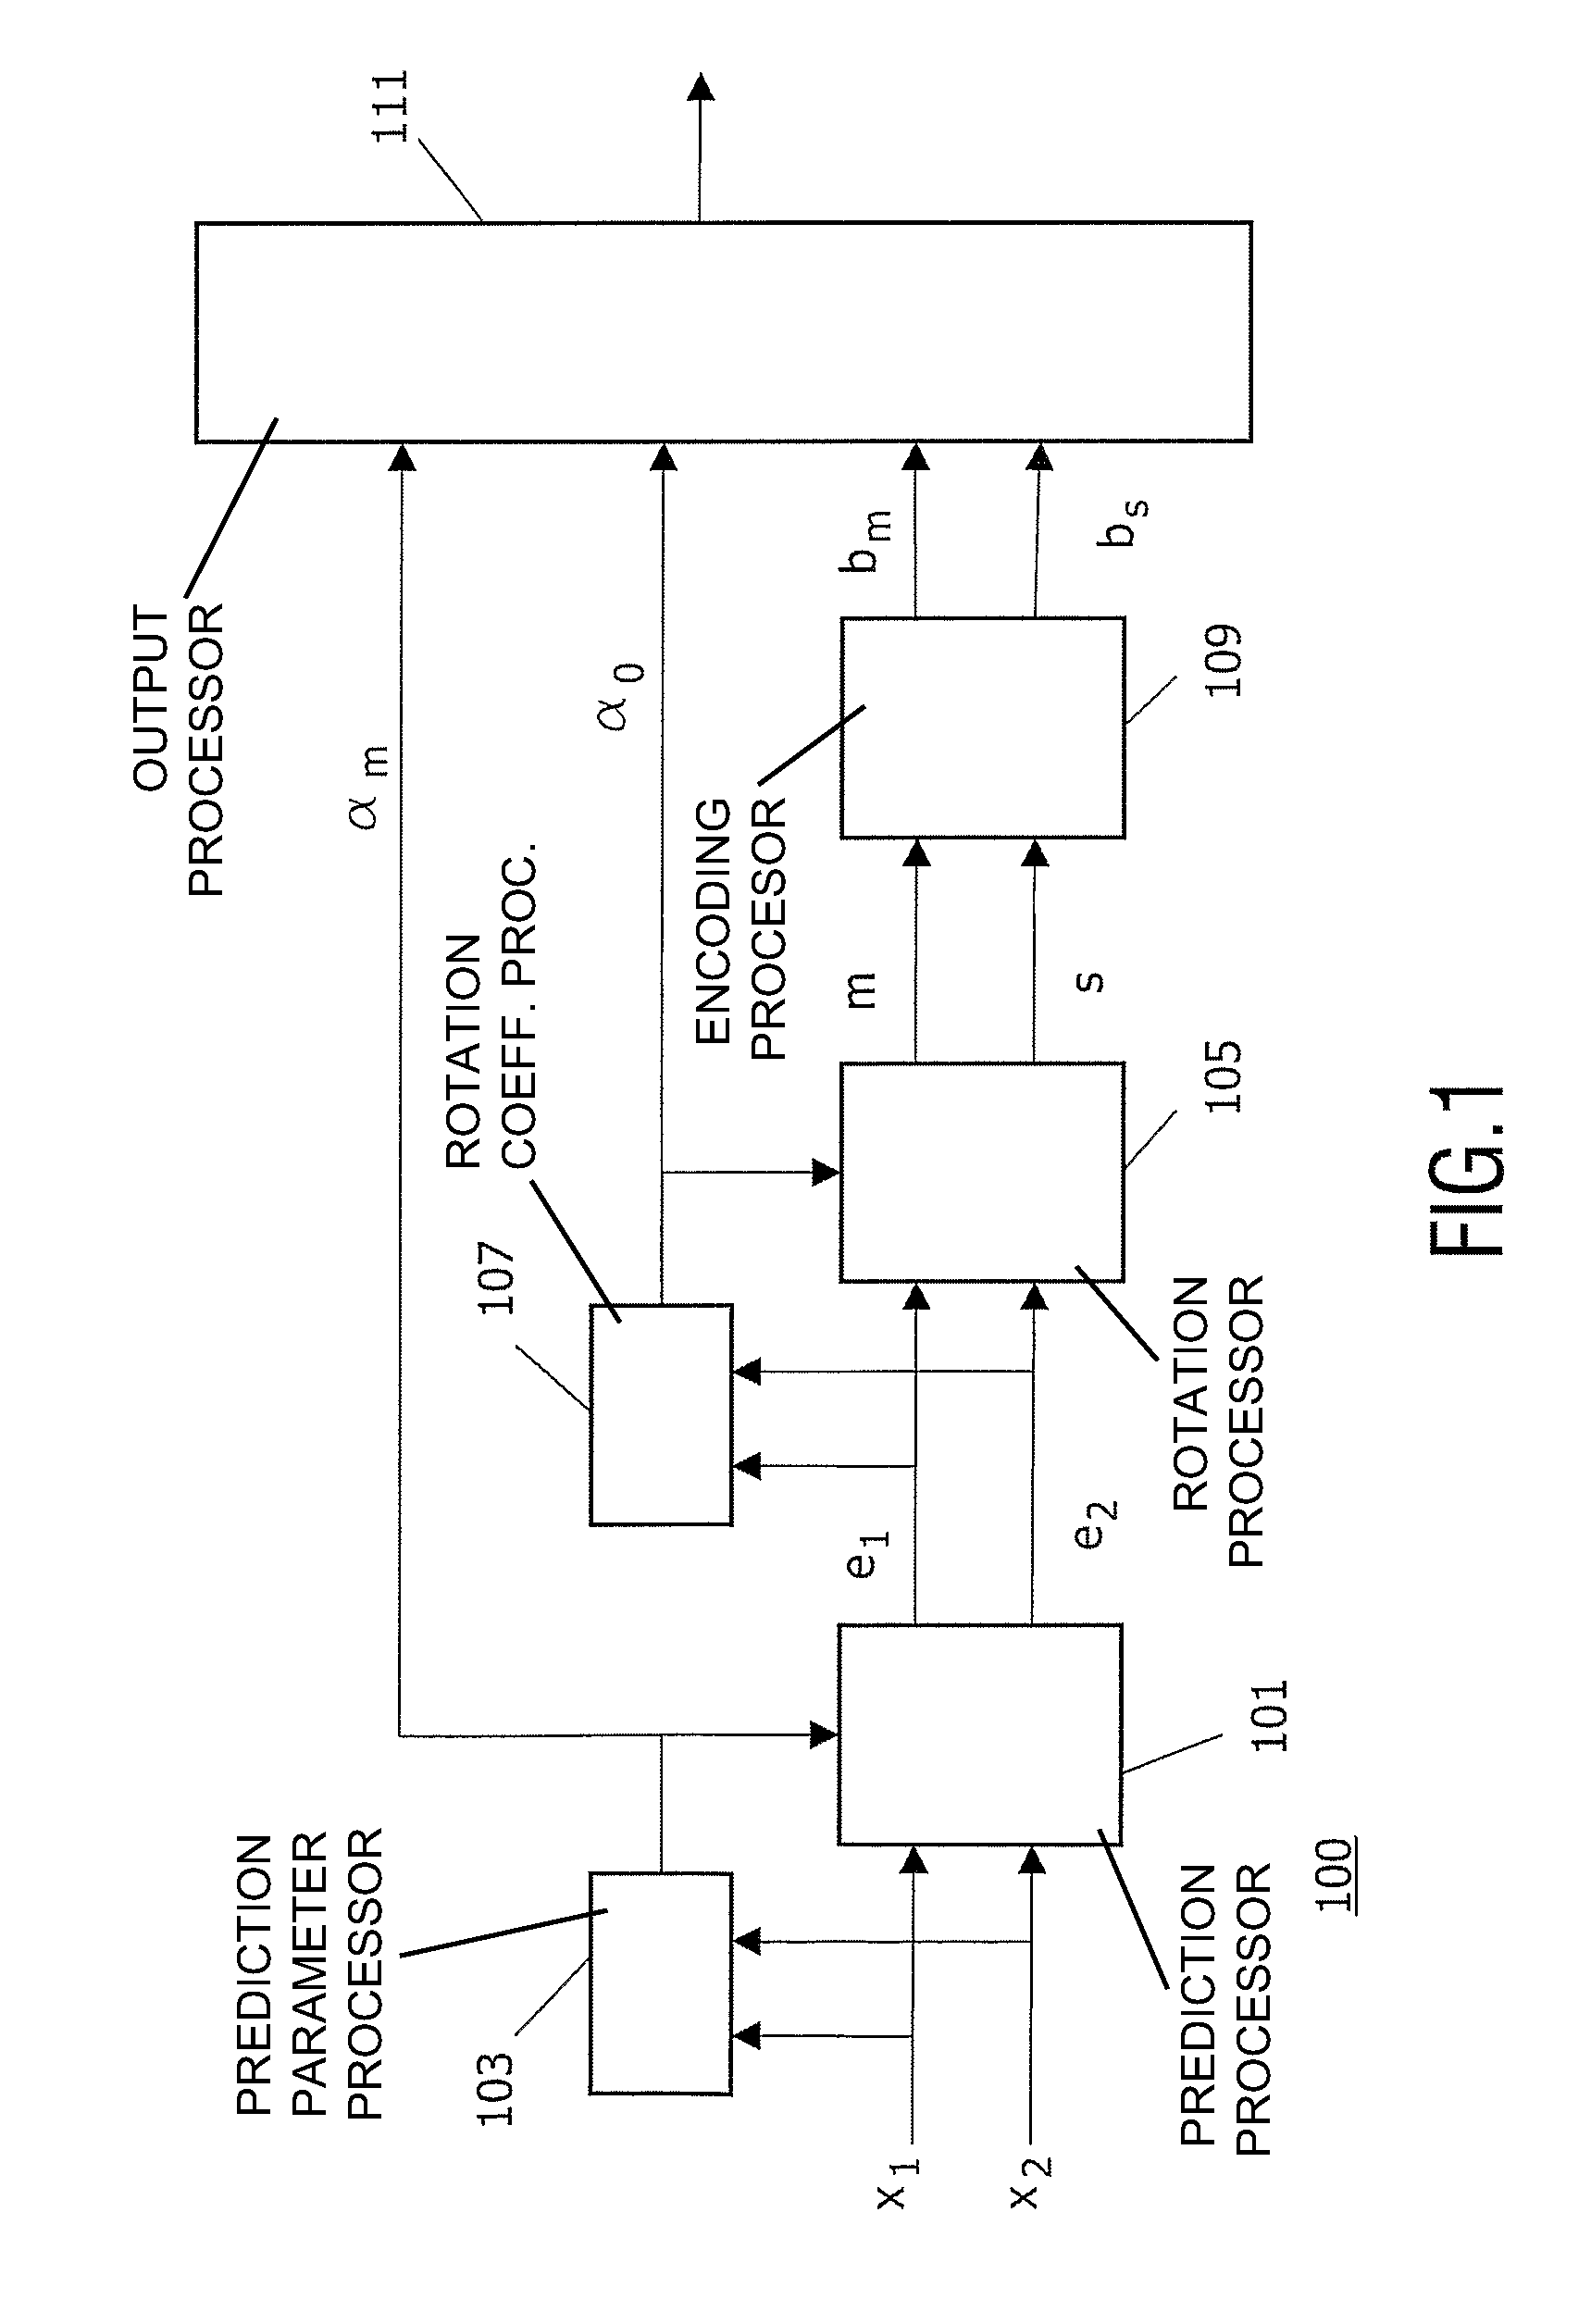 Method and apparatus to encode and decode multi-channel audio signals